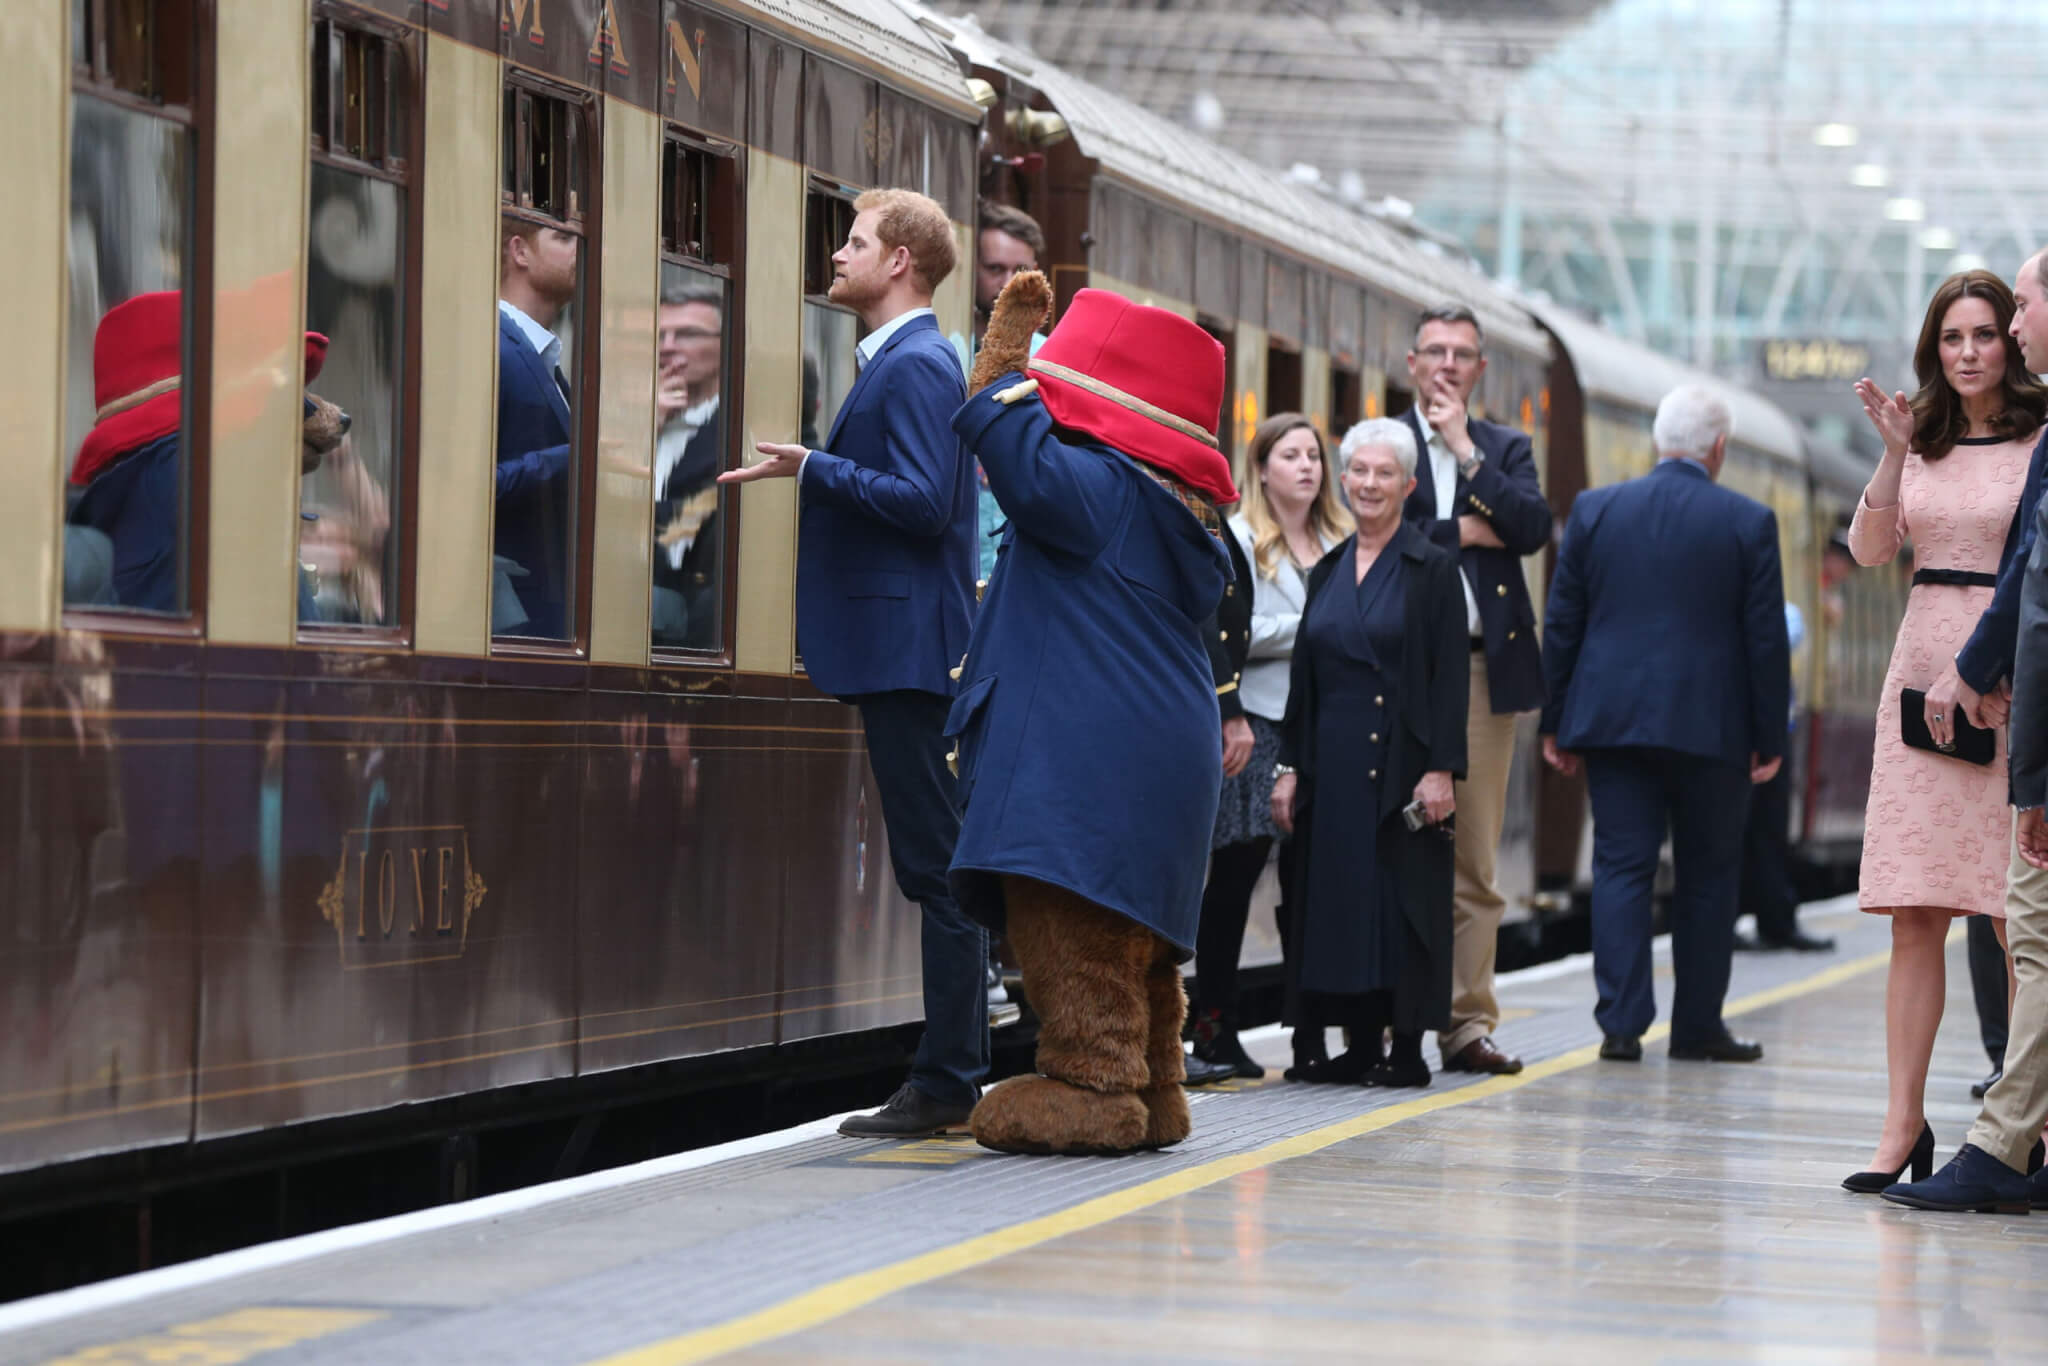 Prince Harry stands with a costumed figure of Paddington bear as he speaks to children onboard the Belmond British Pullman train on platform 1 at Paddington Station, London, as he attends the Charities Forum event, joining children from the charities he supports and to meet the cast and crew from the forthcoming film 'Paddington 2'